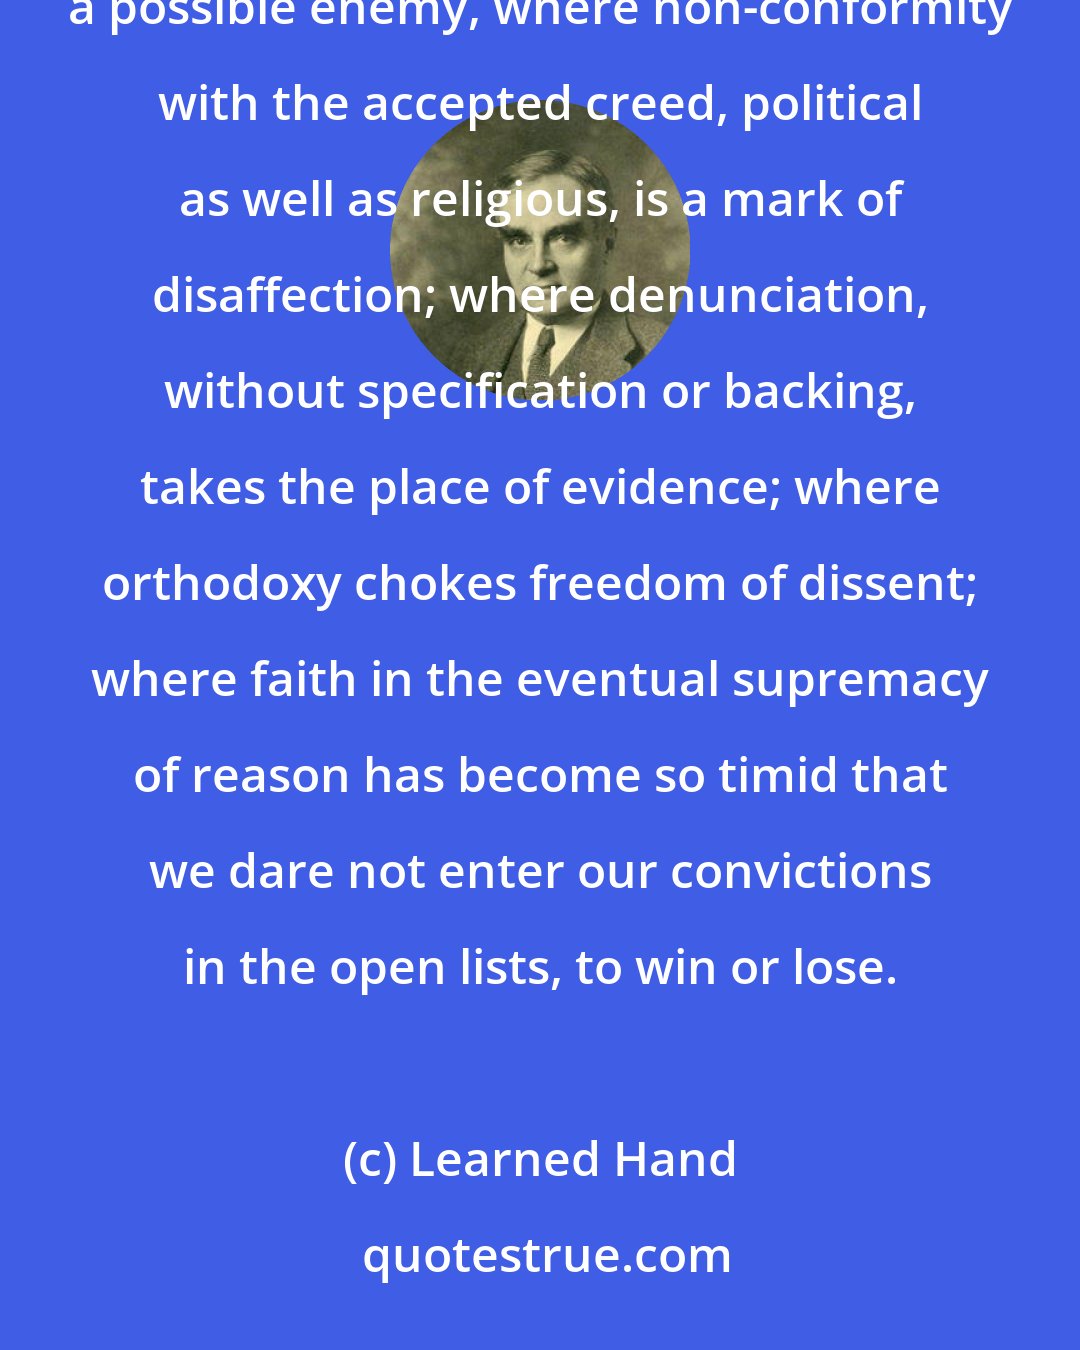 Learned Hand: That community is already in the process of dissolution where each man begins to eye his neighbor as a possible enemy, where non-conformity with the accepted creed, political as well as religious, is a mark of disaffection; where denunciation, without specification or backing, takes the place of evidence; where orthodoxy chokes freedom of dissent; where faith in the eventual supremacy of reason has become so timid that we dare not enter our convictions in the open lists, to win or lose.